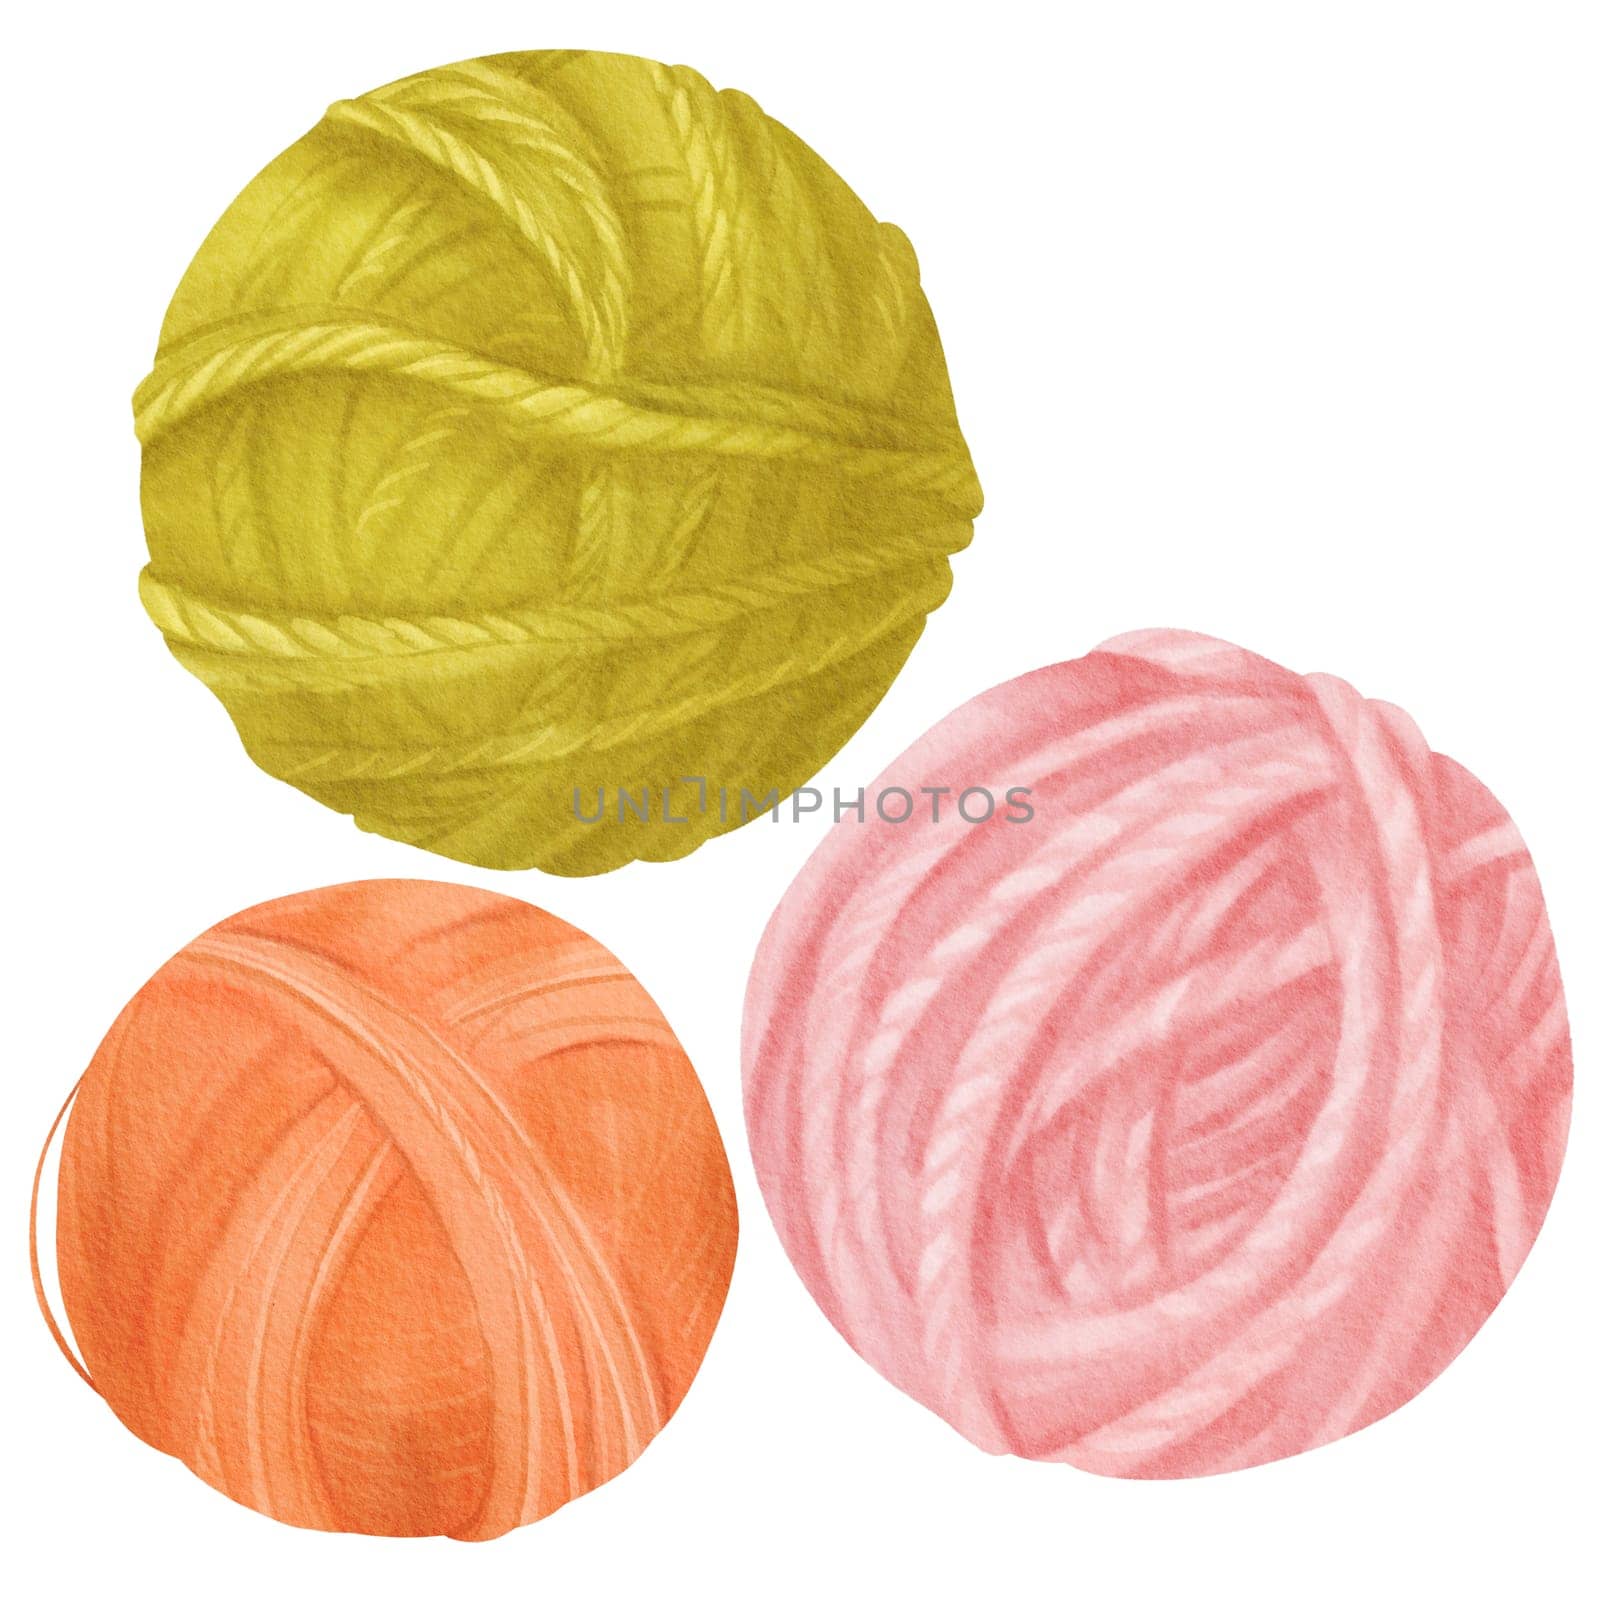 A collection of assorted yarn skeins. Yarn balls crafted from cotton and wool. green, orange and pink. Watercolor isolated elements for crafting enthusiasts, textile designs, and knitting tutorials.